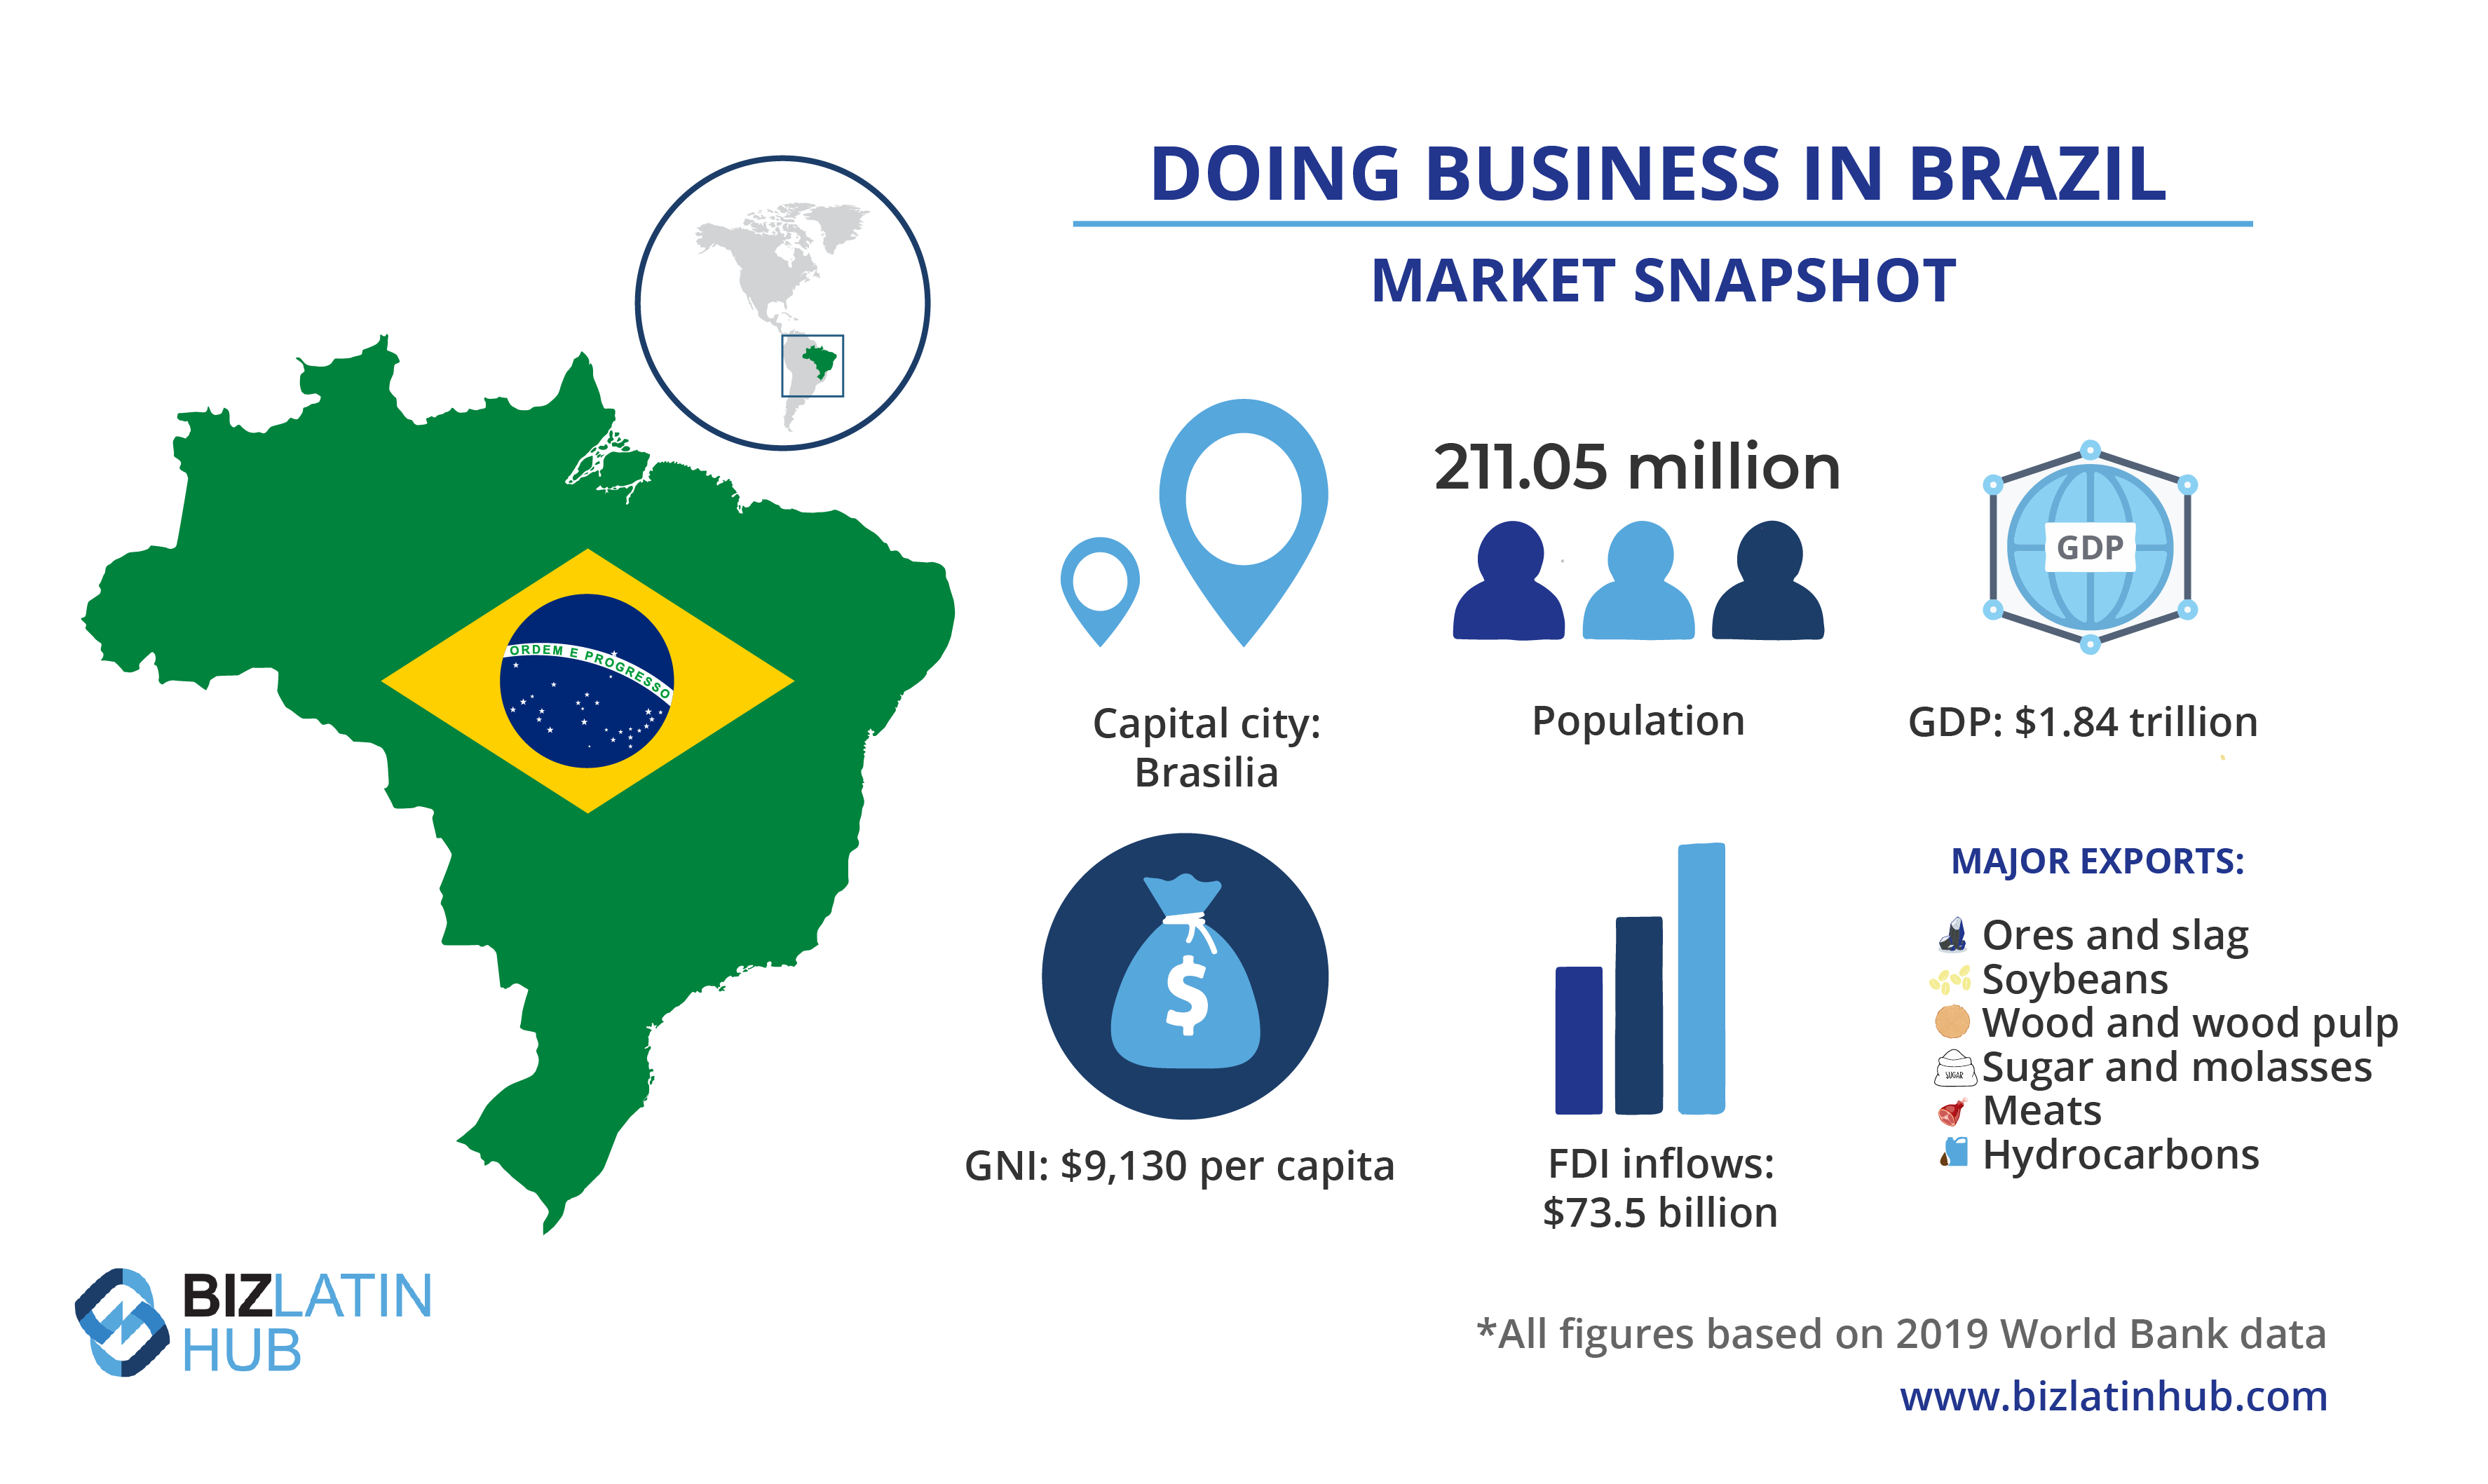 Snapshot of the market in Brazil, where you may wish to carry out M&A due diligence 